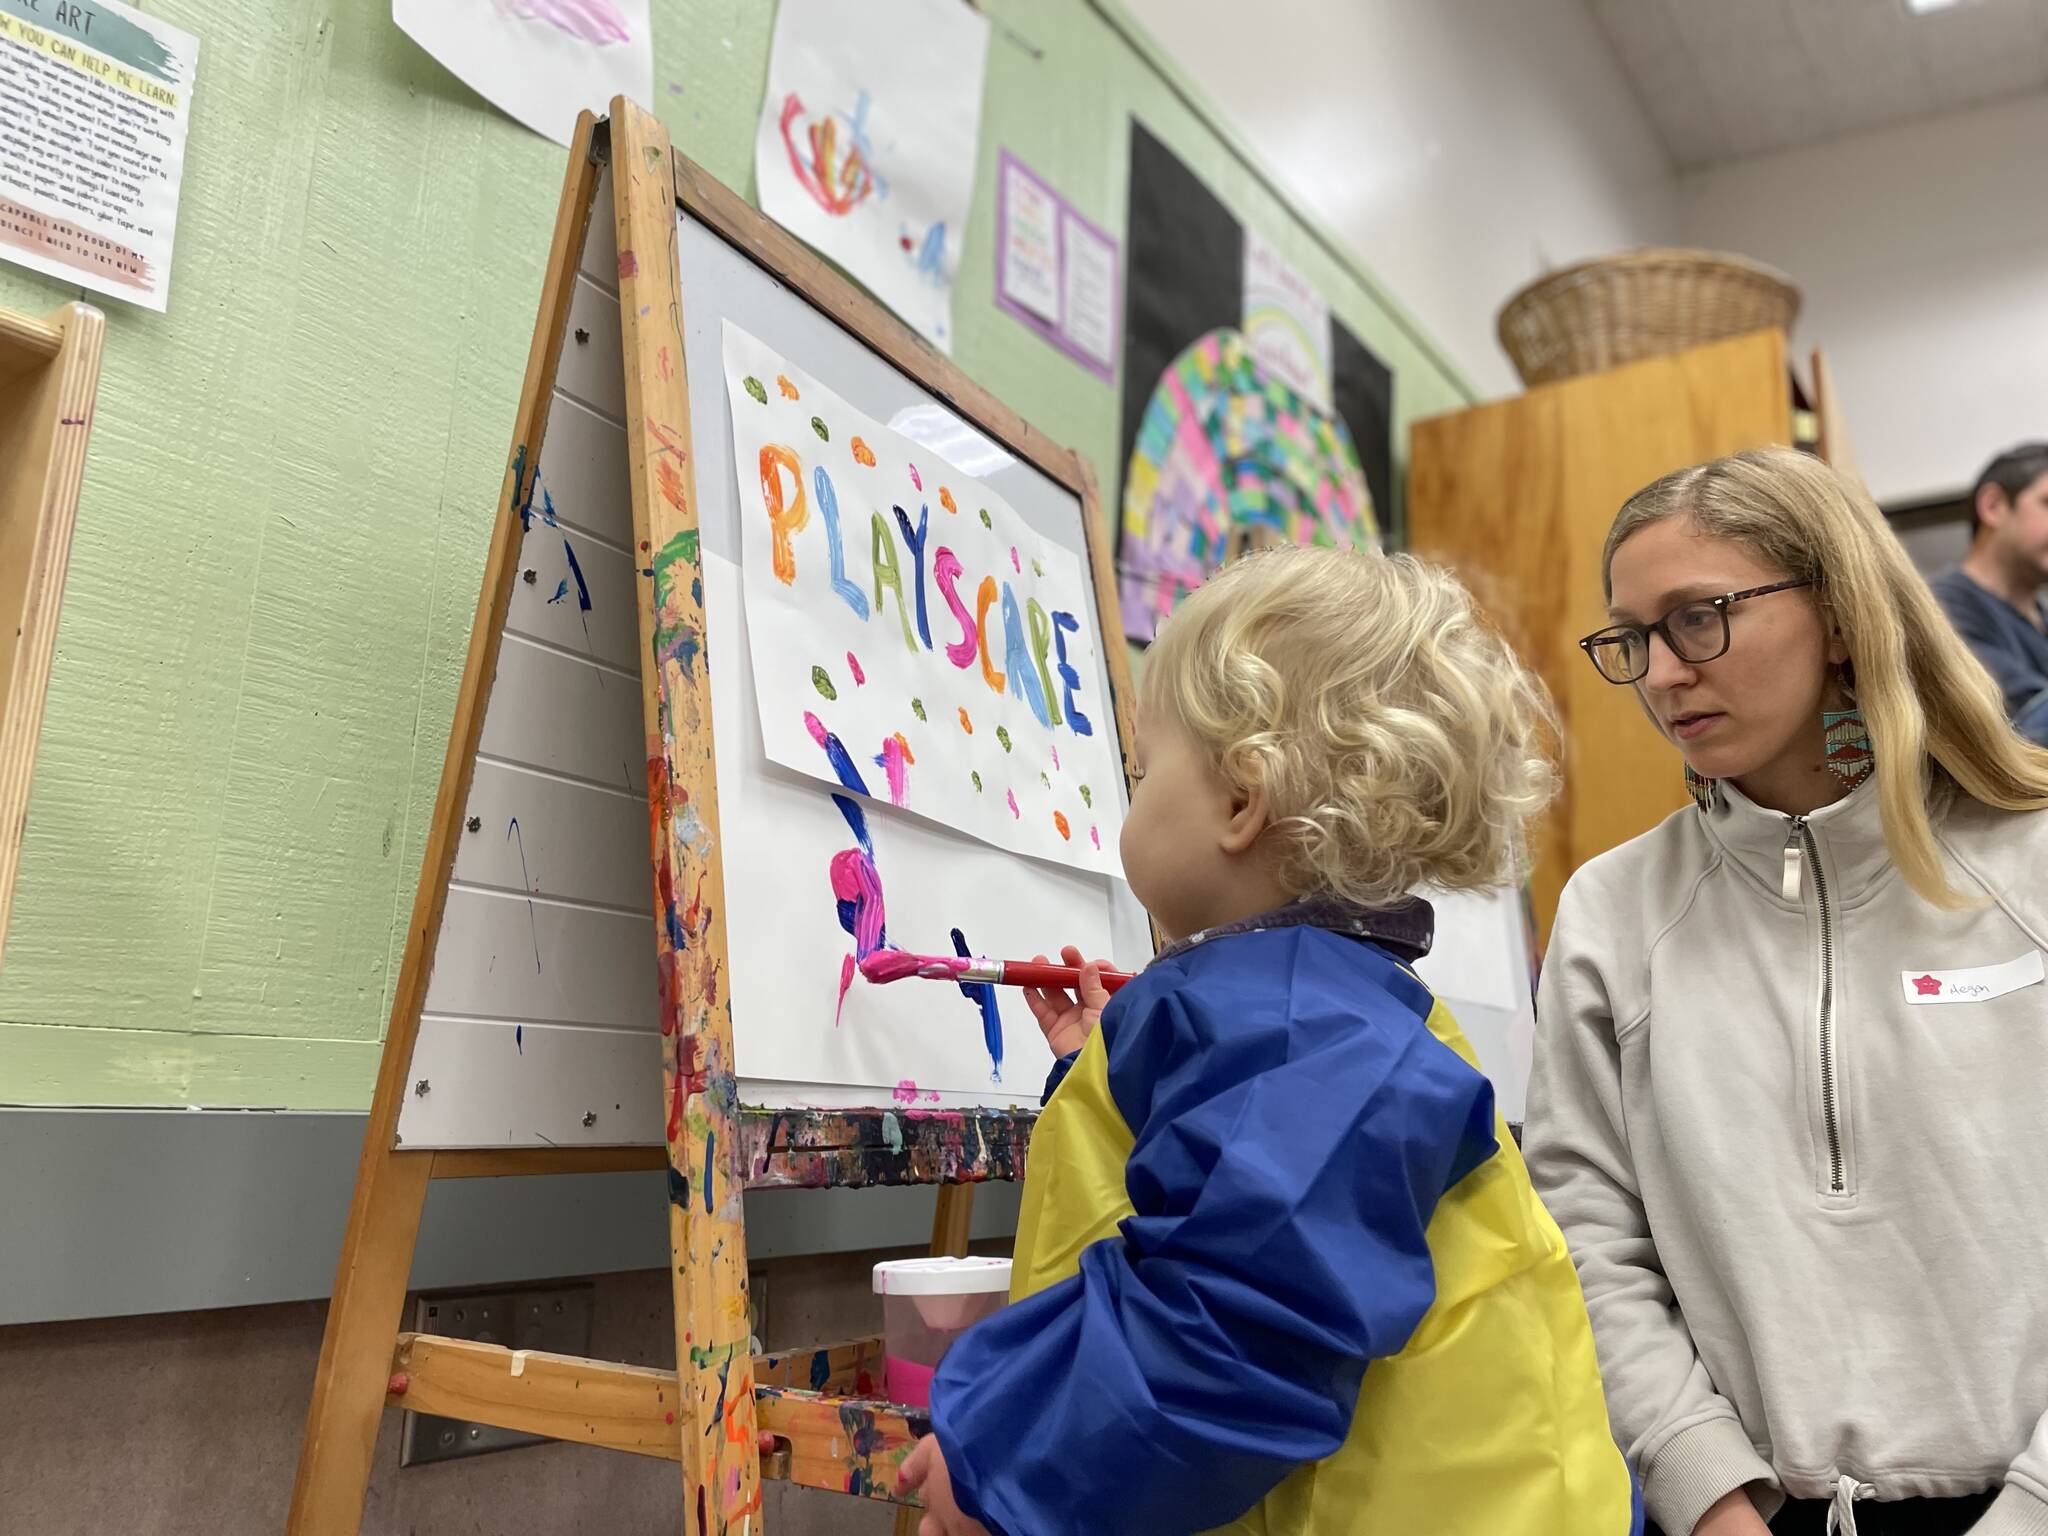 Photo provided
Sage, 17 months, paints a picture at Playscape while her mom, Megan Ostermick-Durkee, looks on.